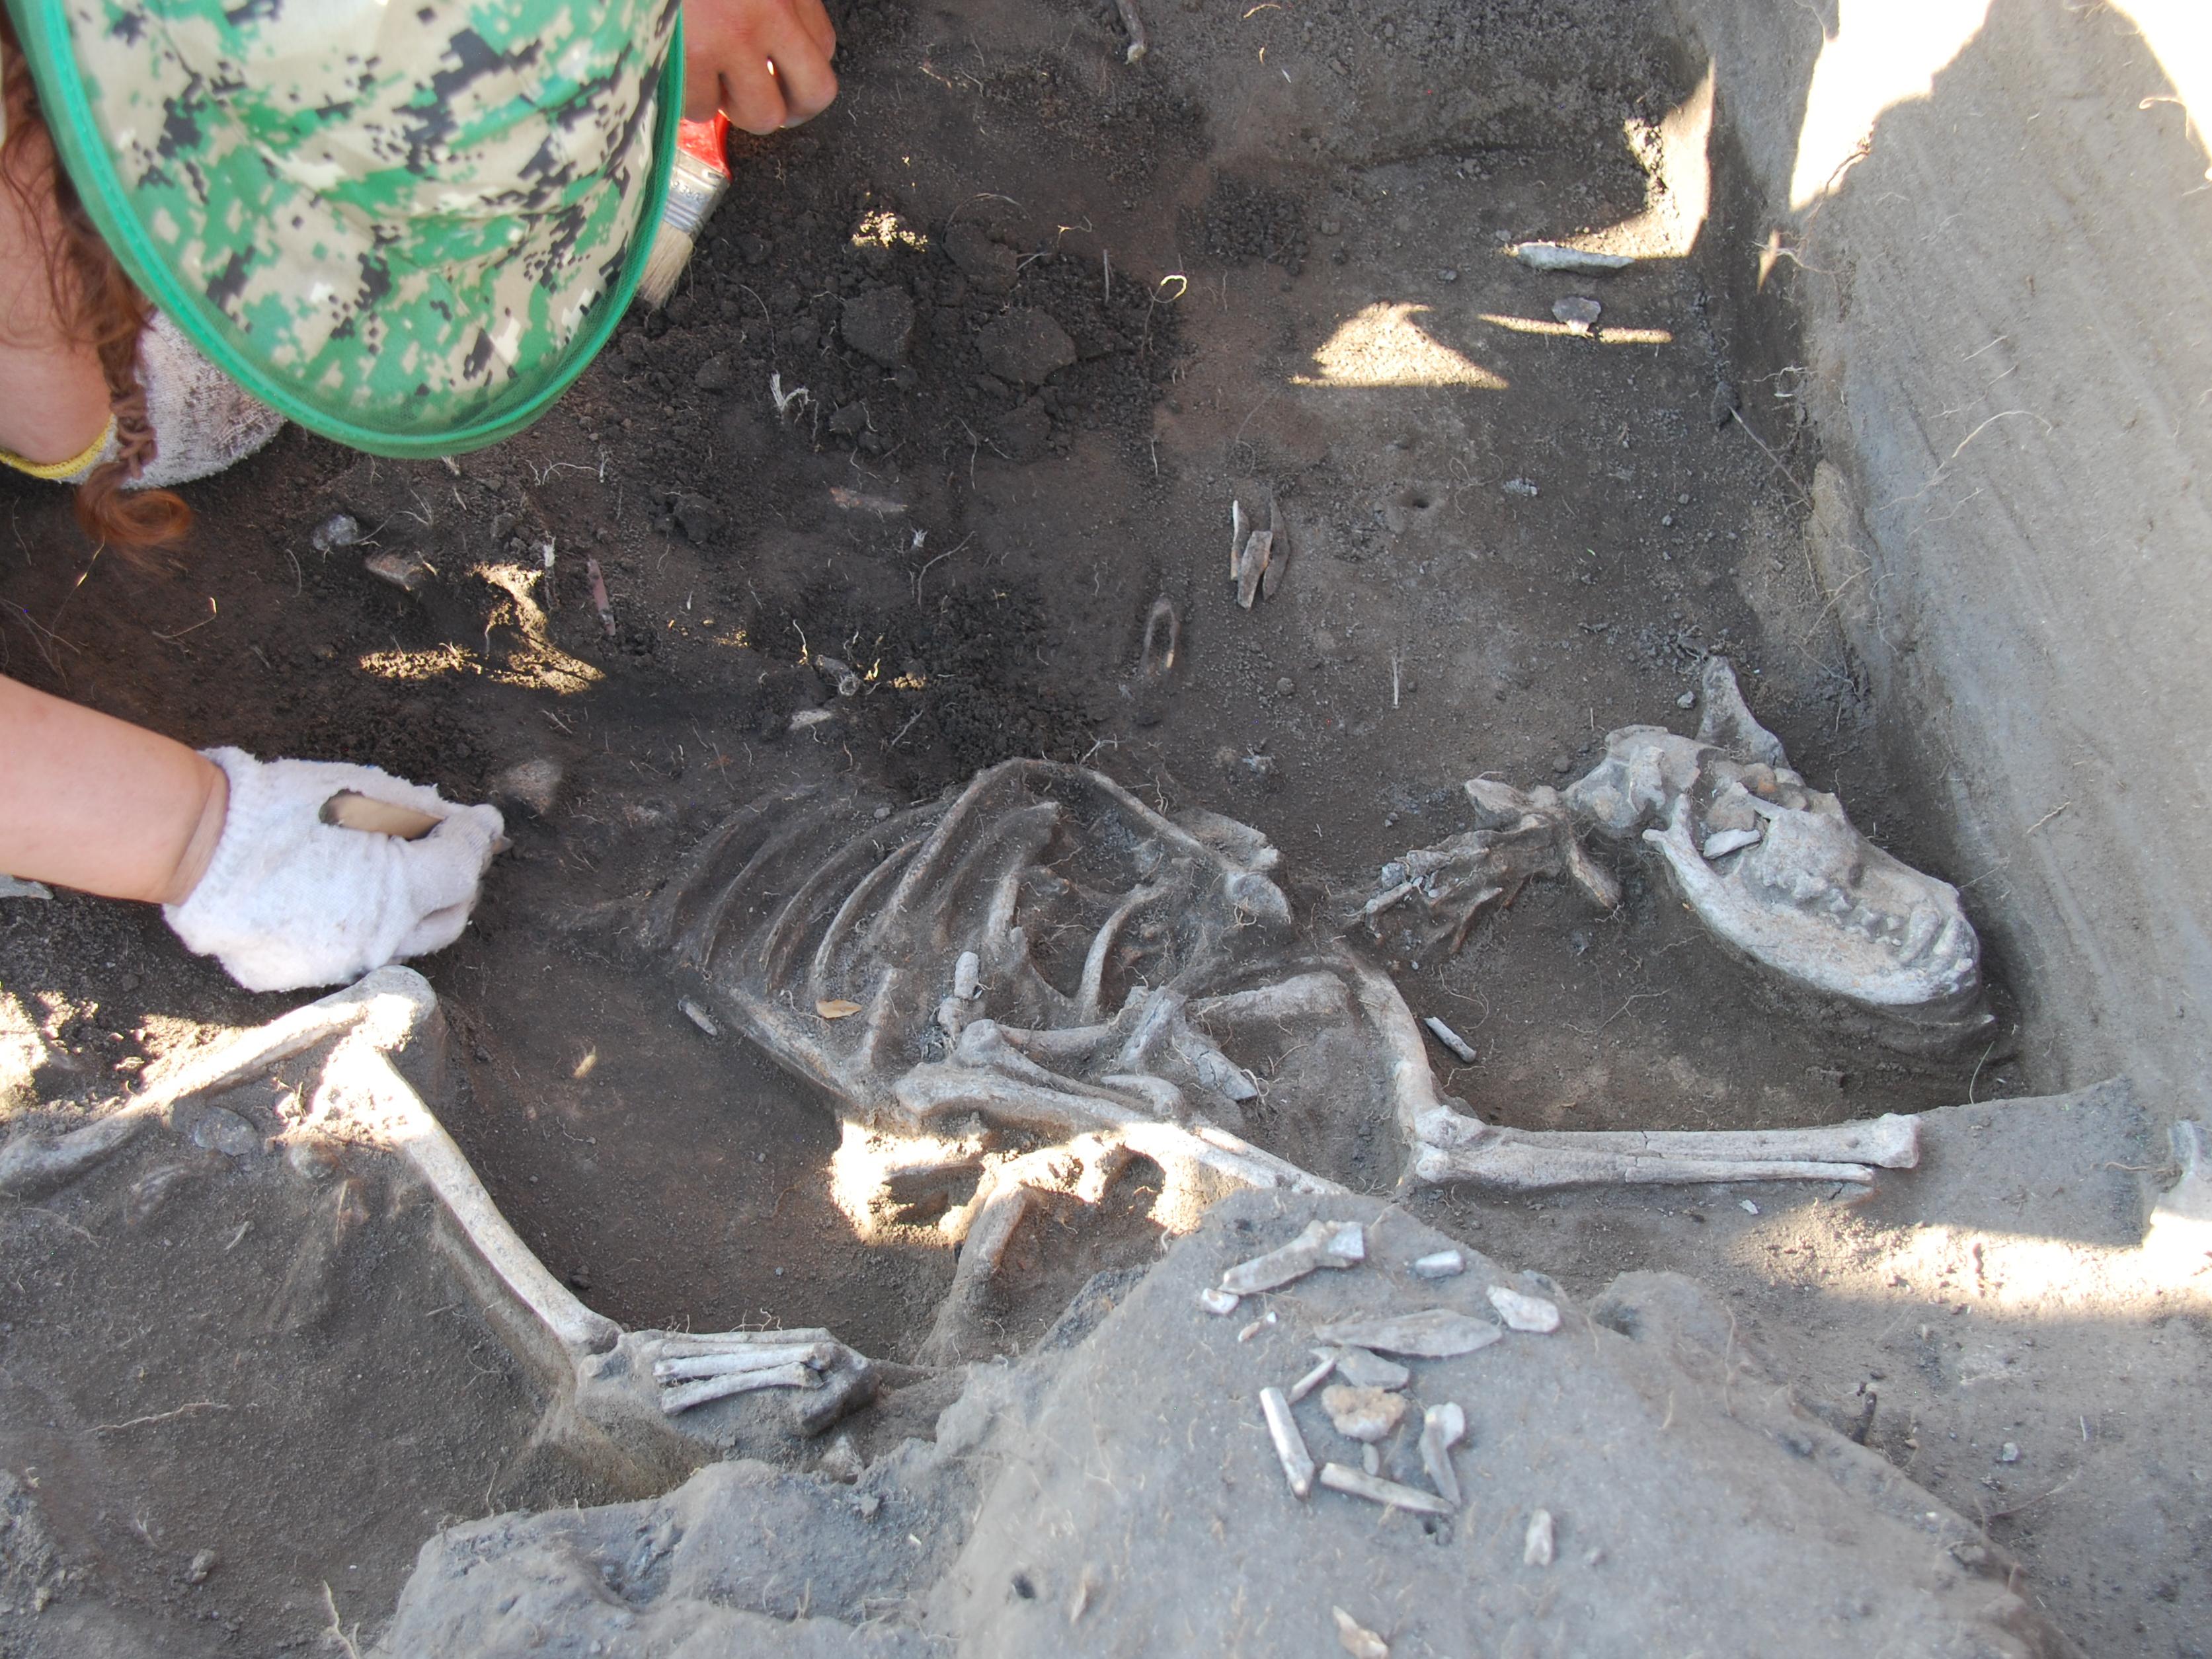 A skeleton of a dog being excavated from the floor of a dwelling in the Gobi Steppe.